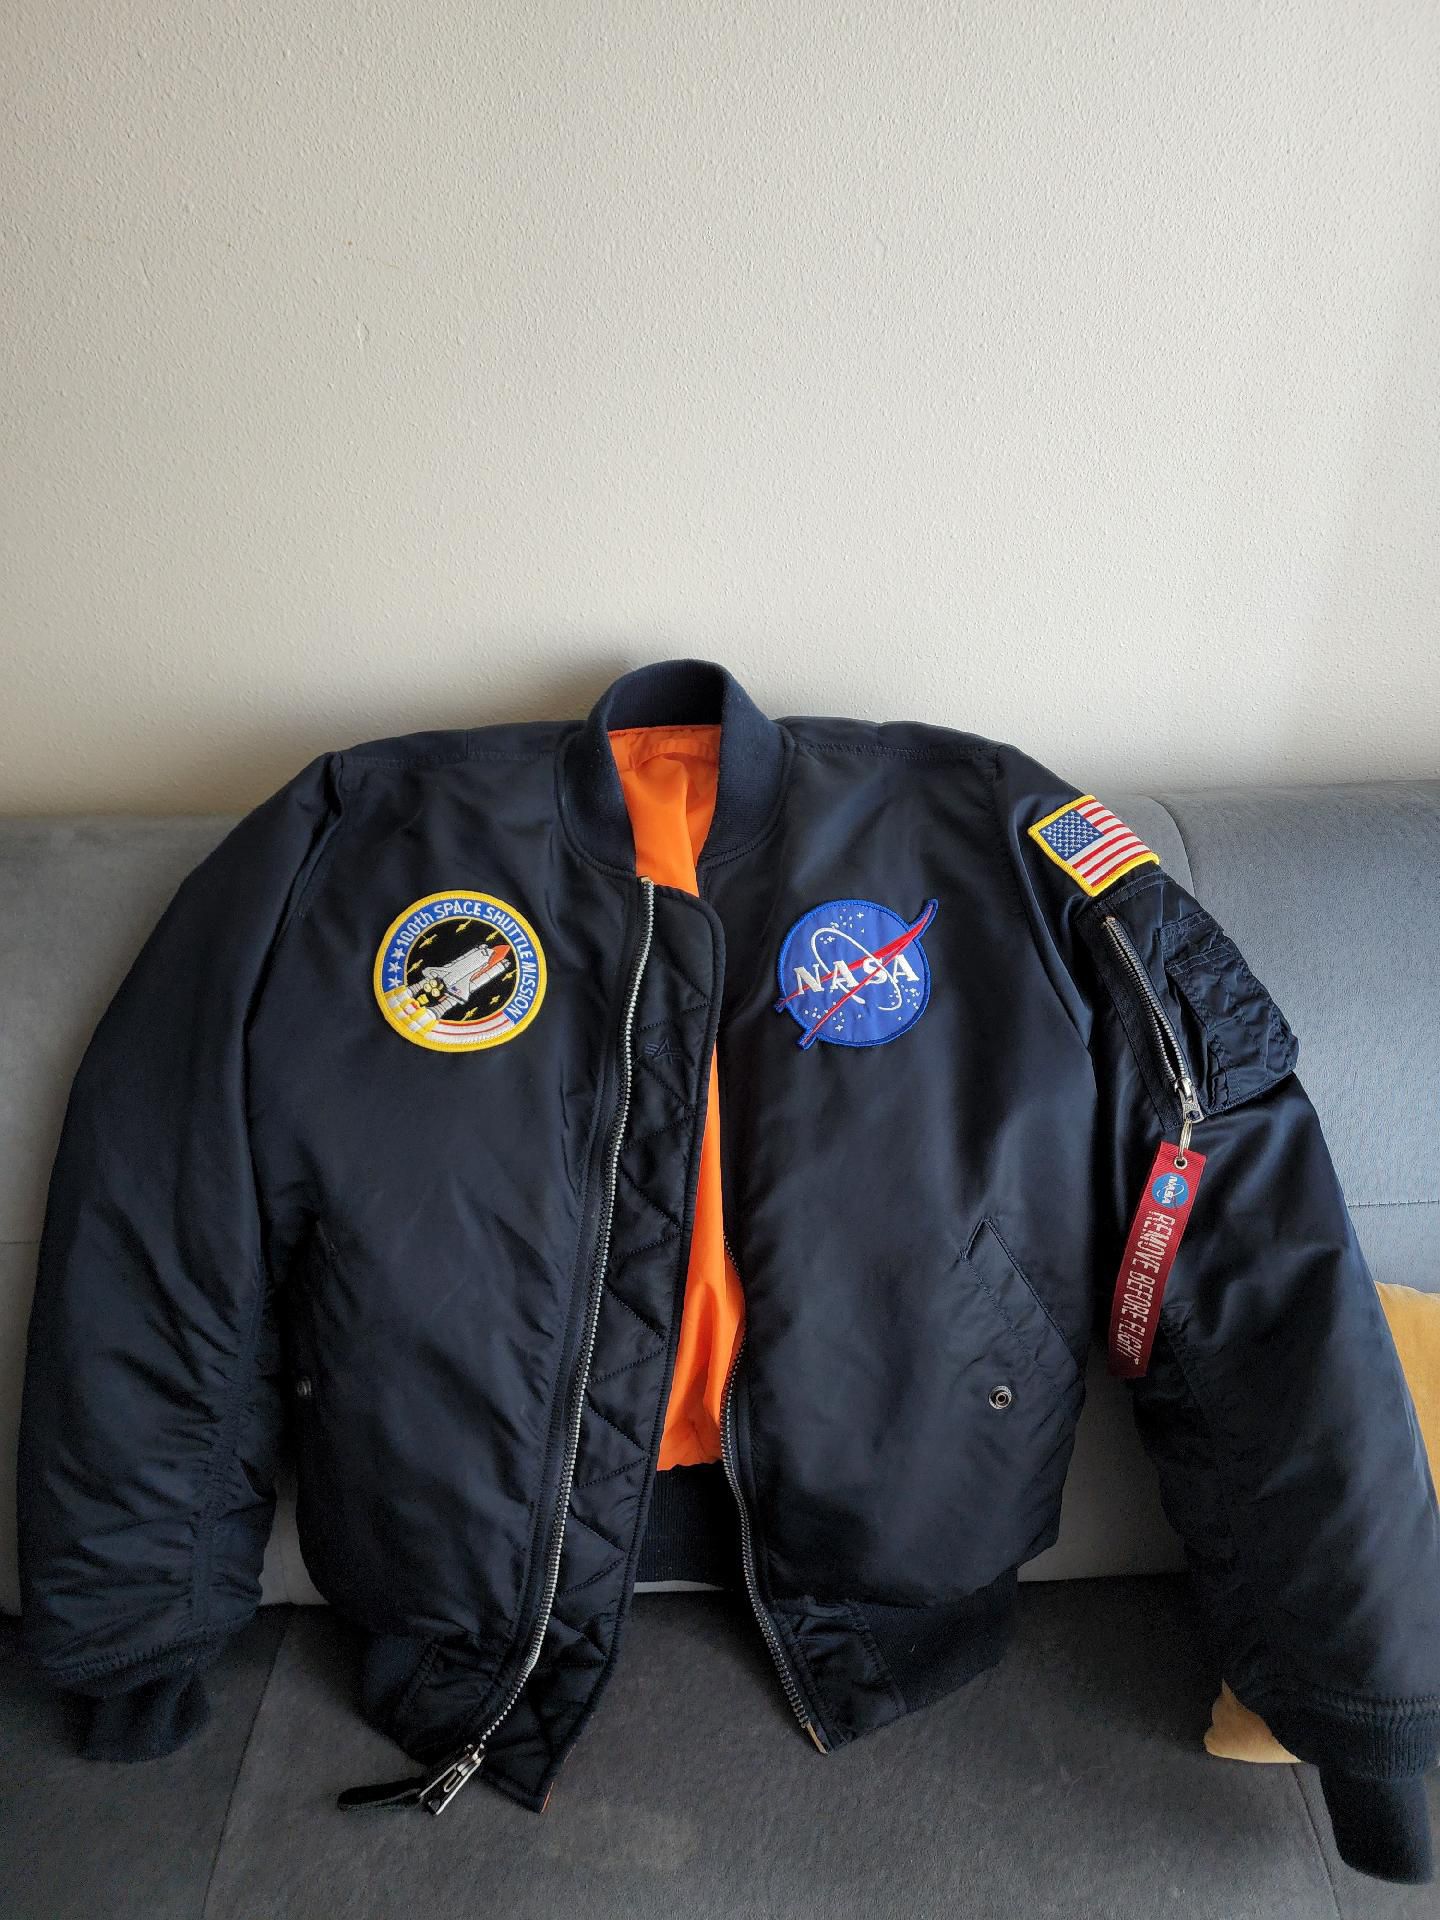 NASA Space 100th Space Shuttle Mission Bomber Jacket Size M Navy Blue